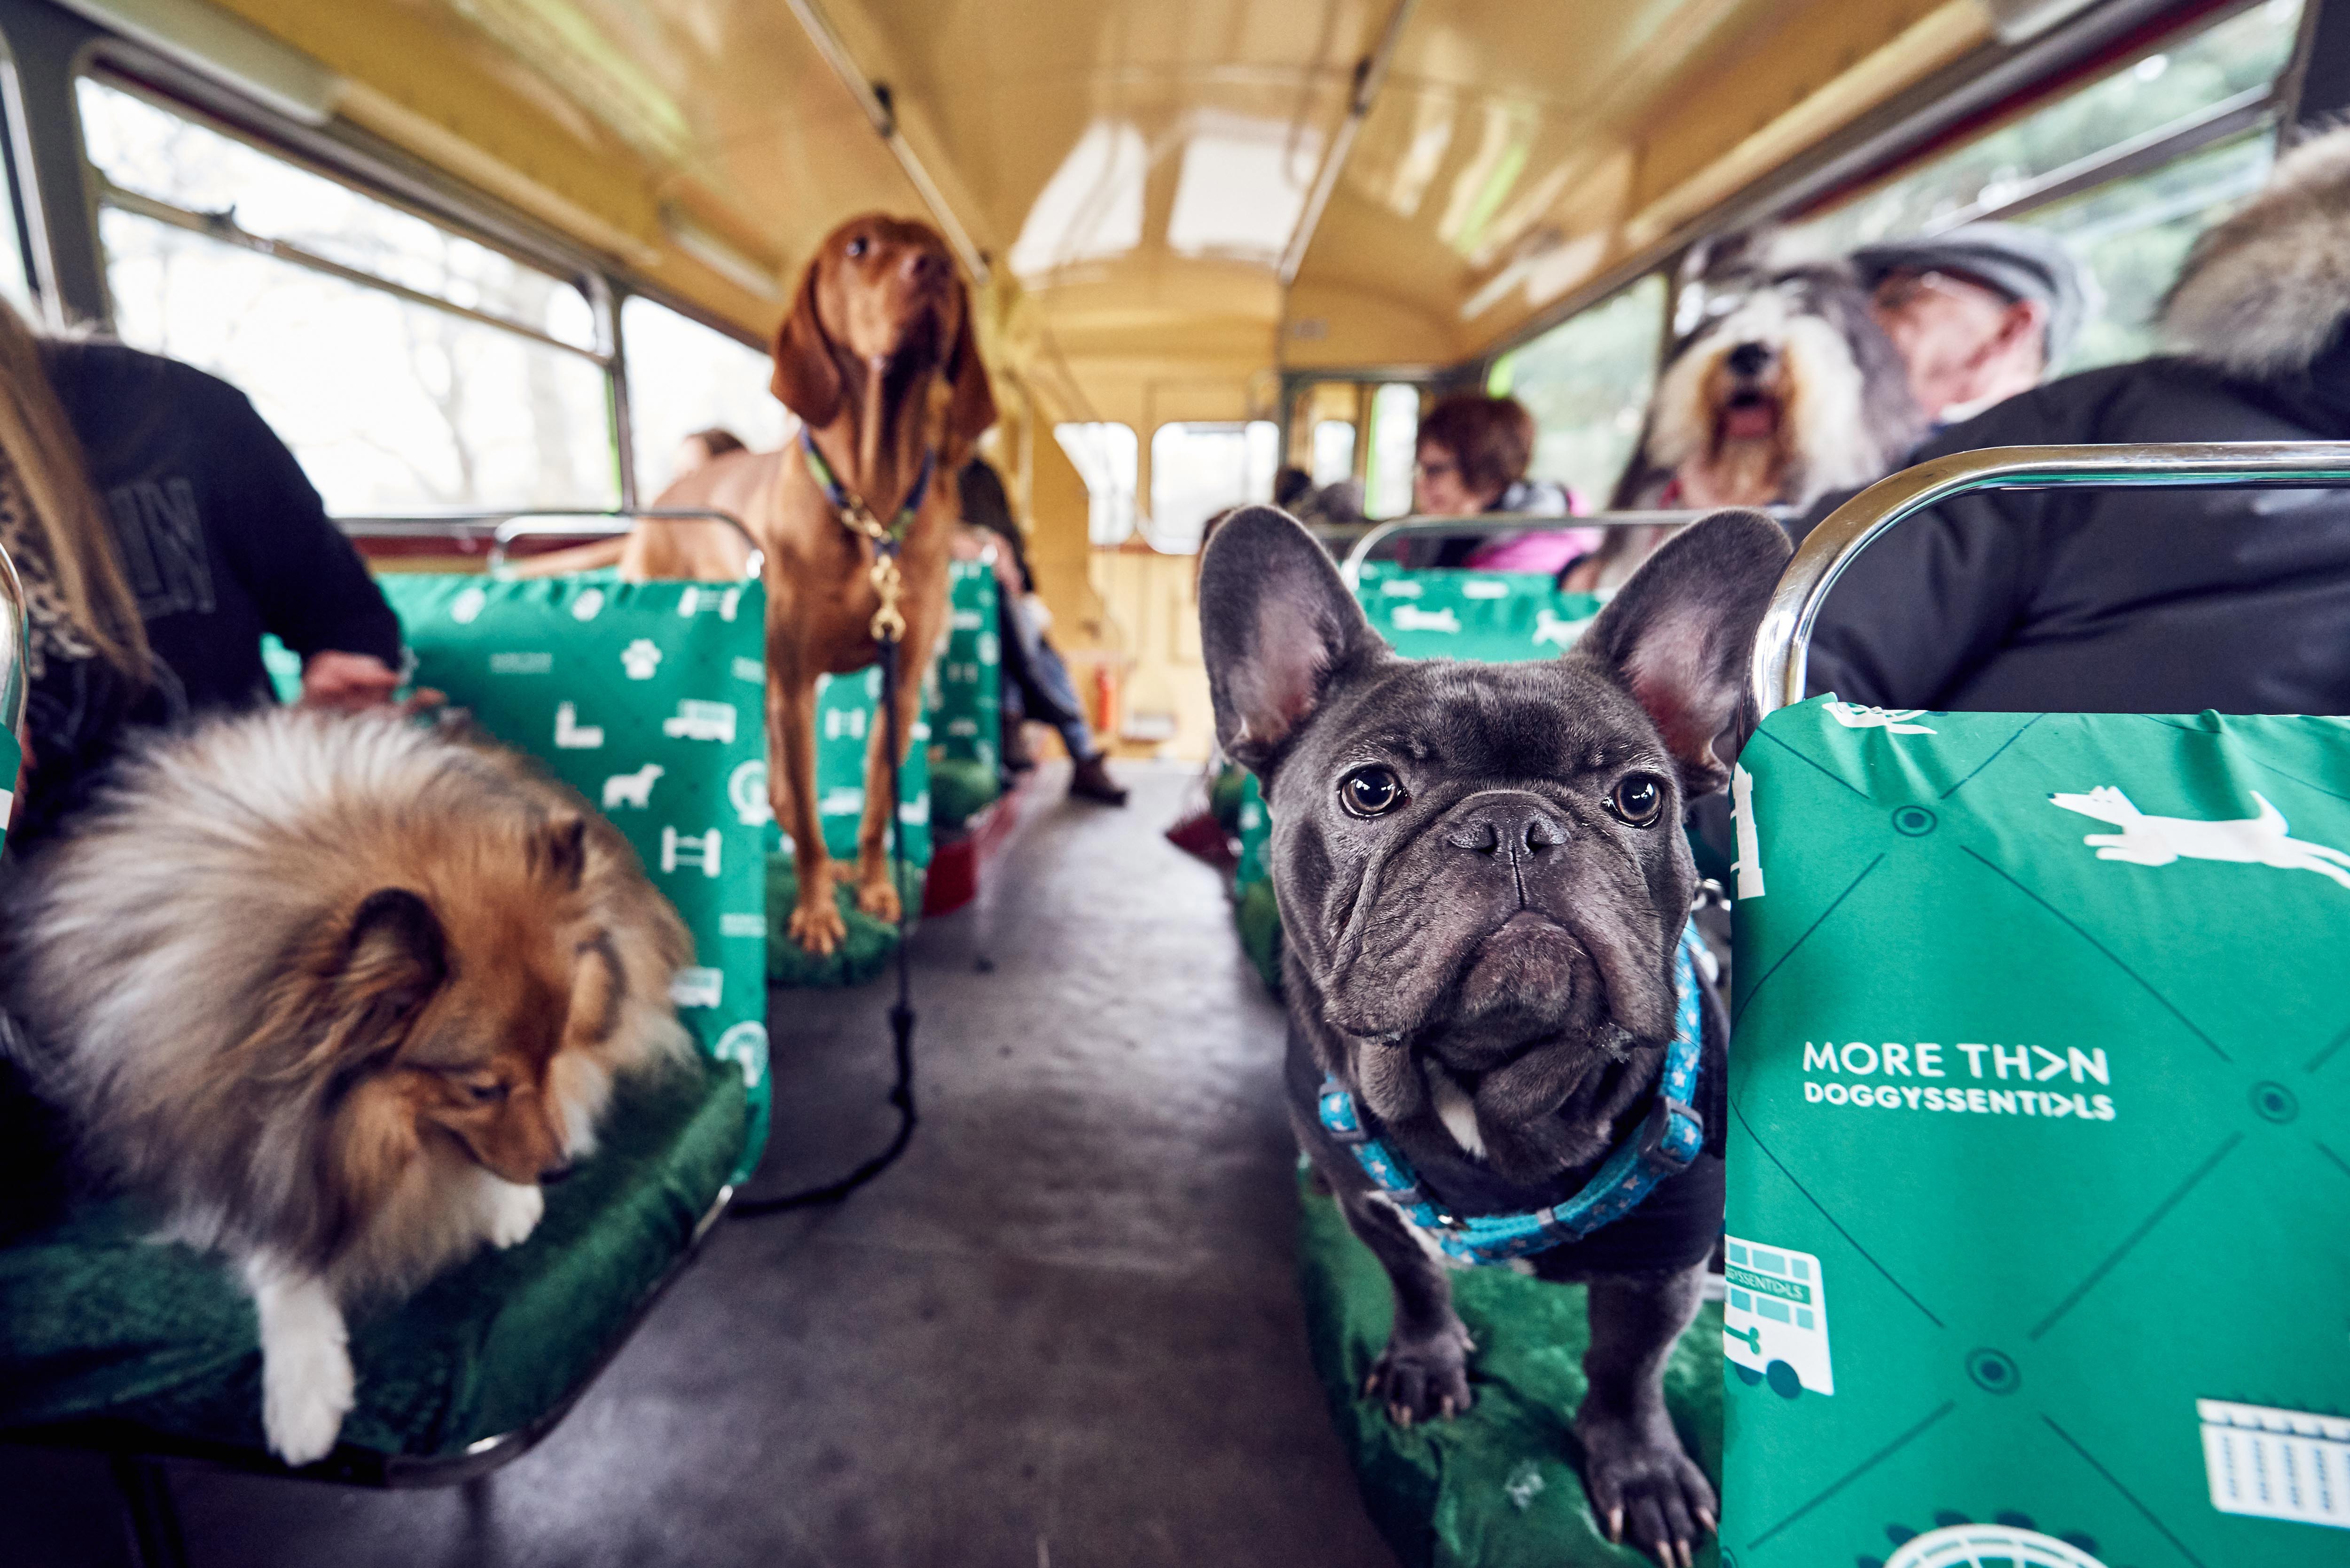 Tour London With Your Dogs on the New K9 Bus - Condé Nast Traveler